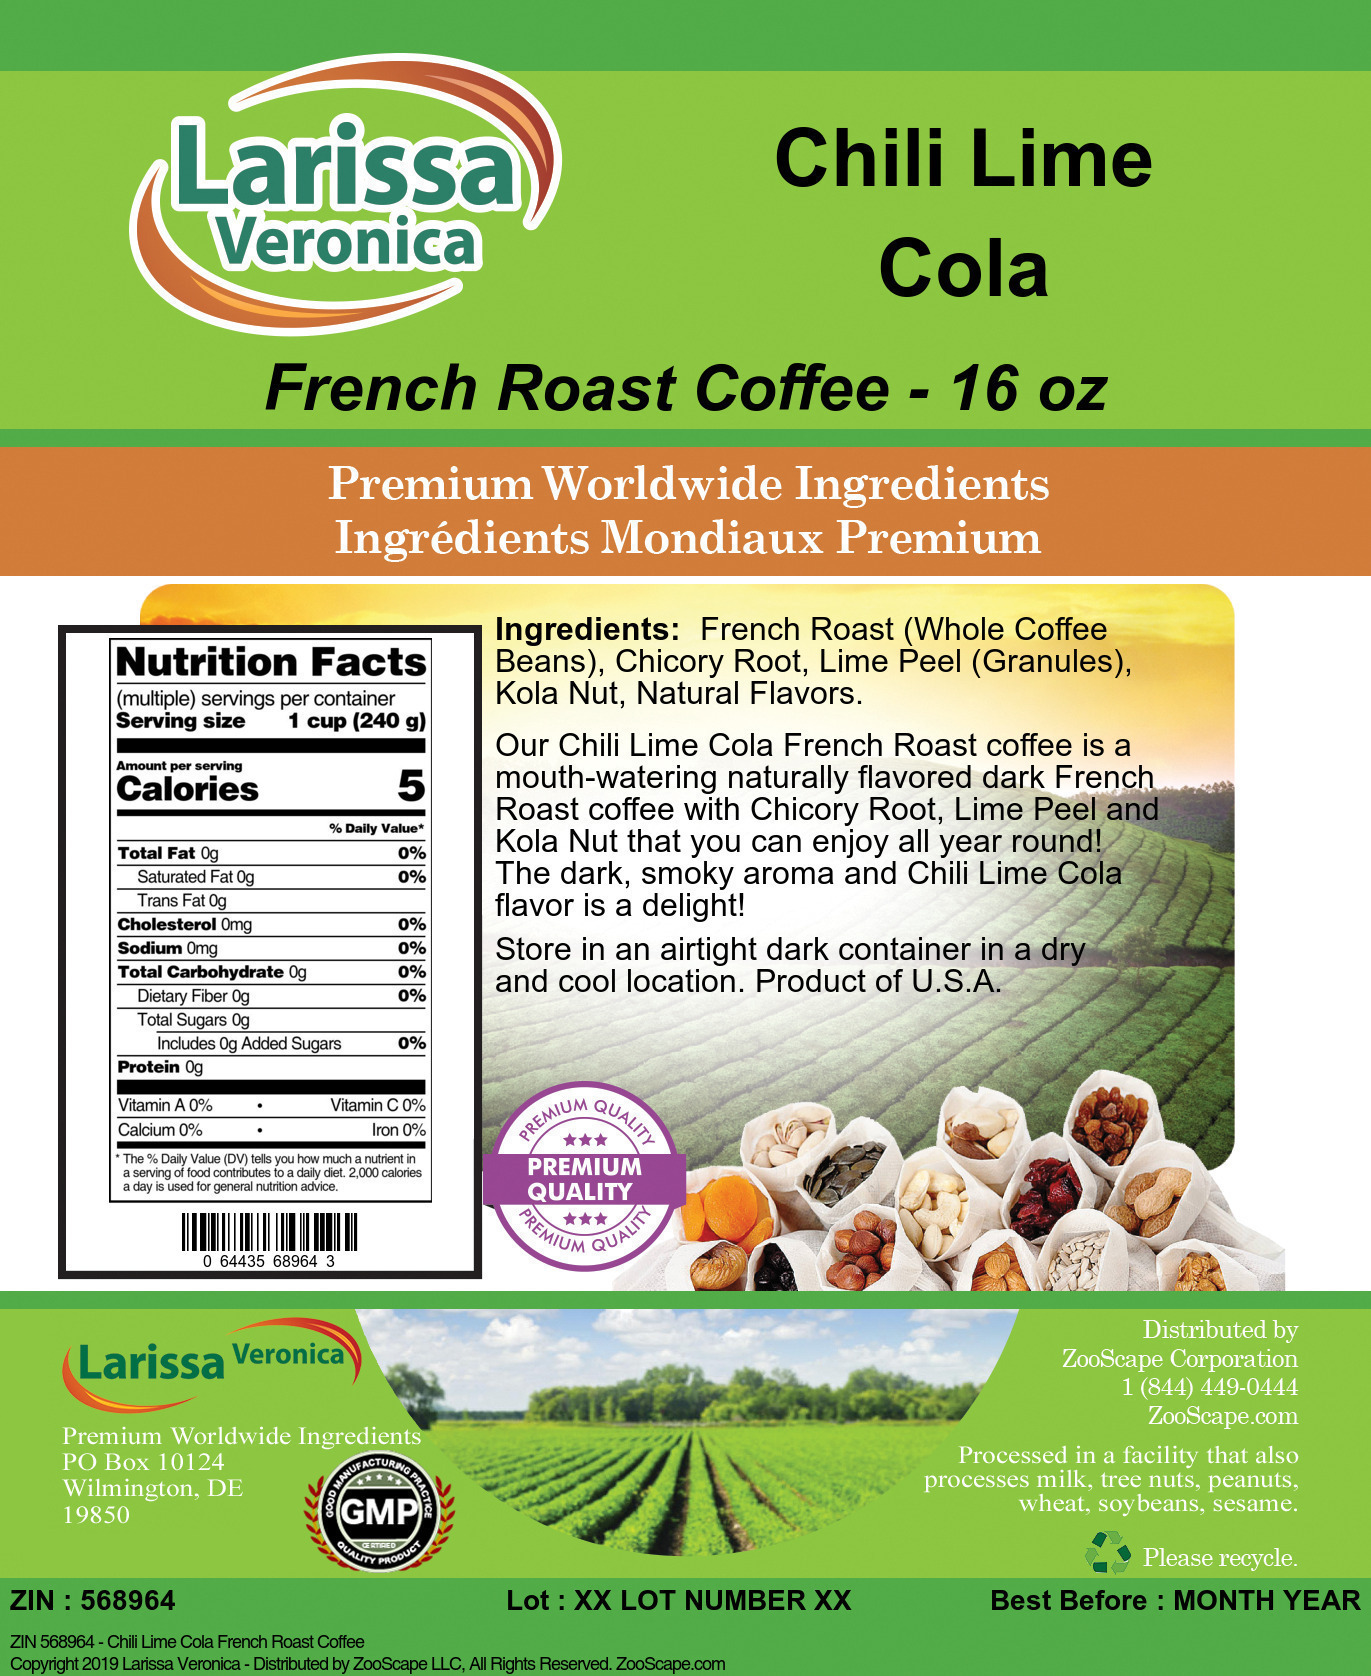 Chili Lime Cola French Roast Coffee - Label